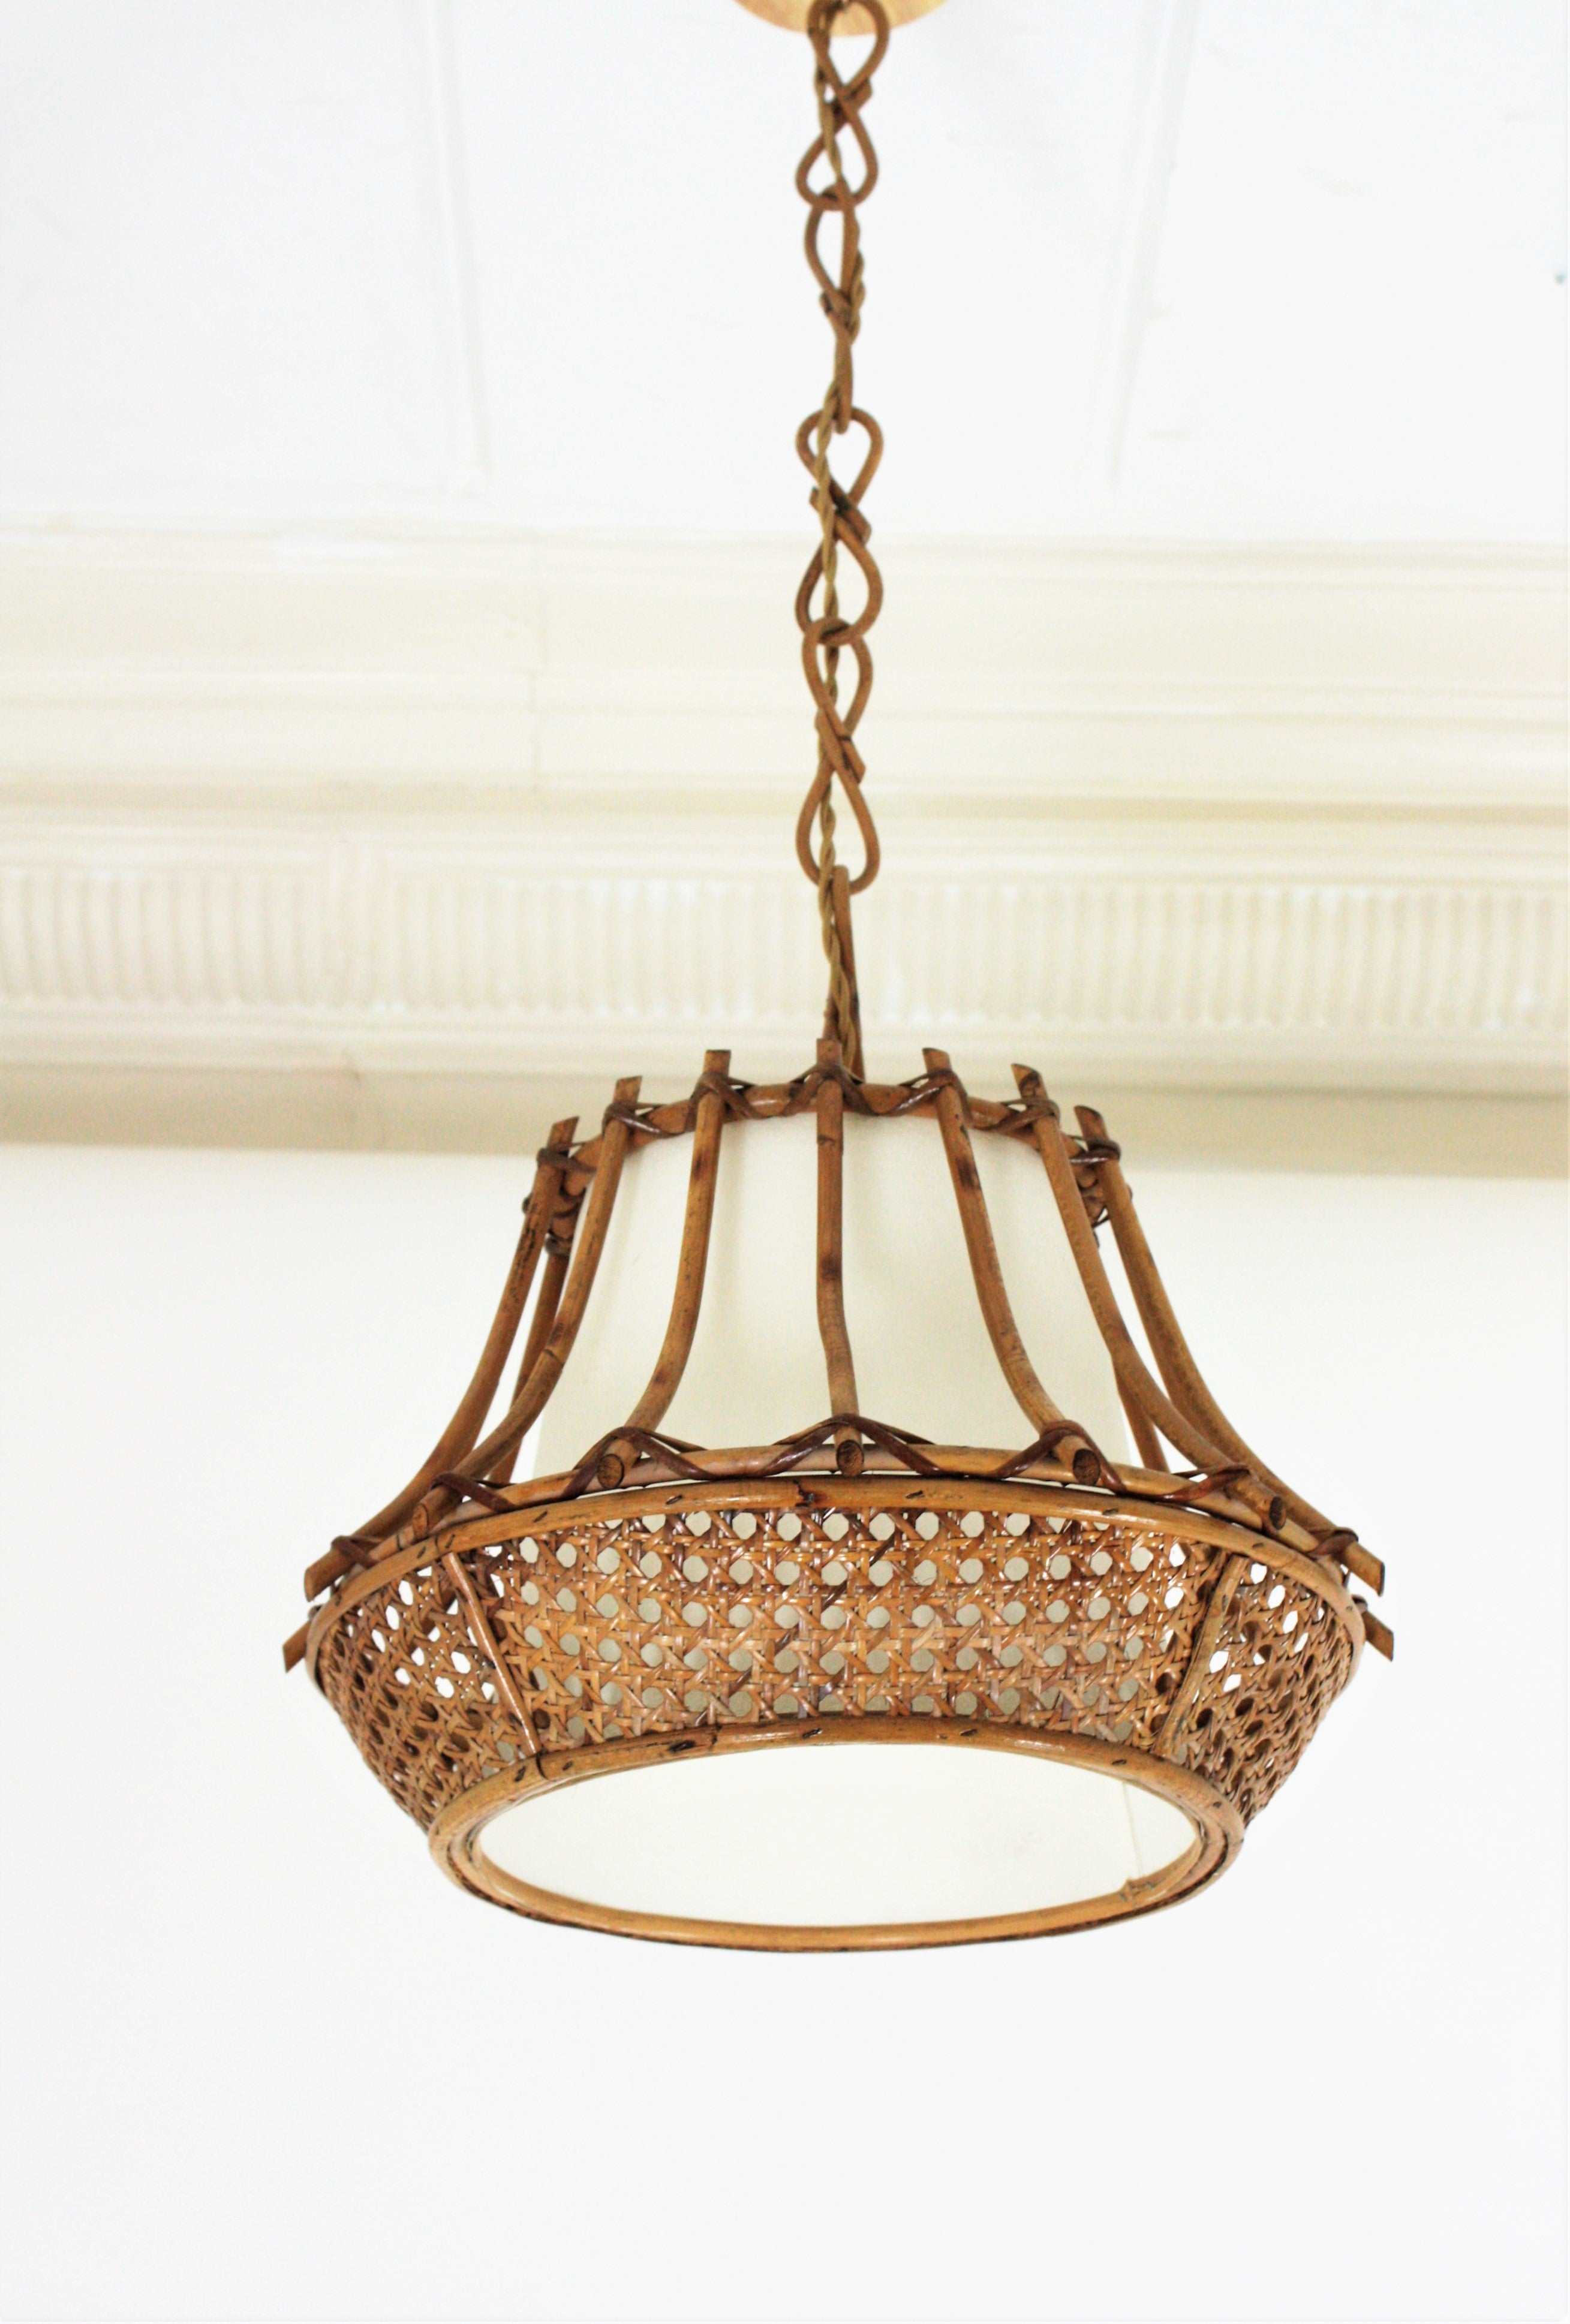 French Rattan Wicker Pagoda Pendant Light or Lantern, 1960s For Sale